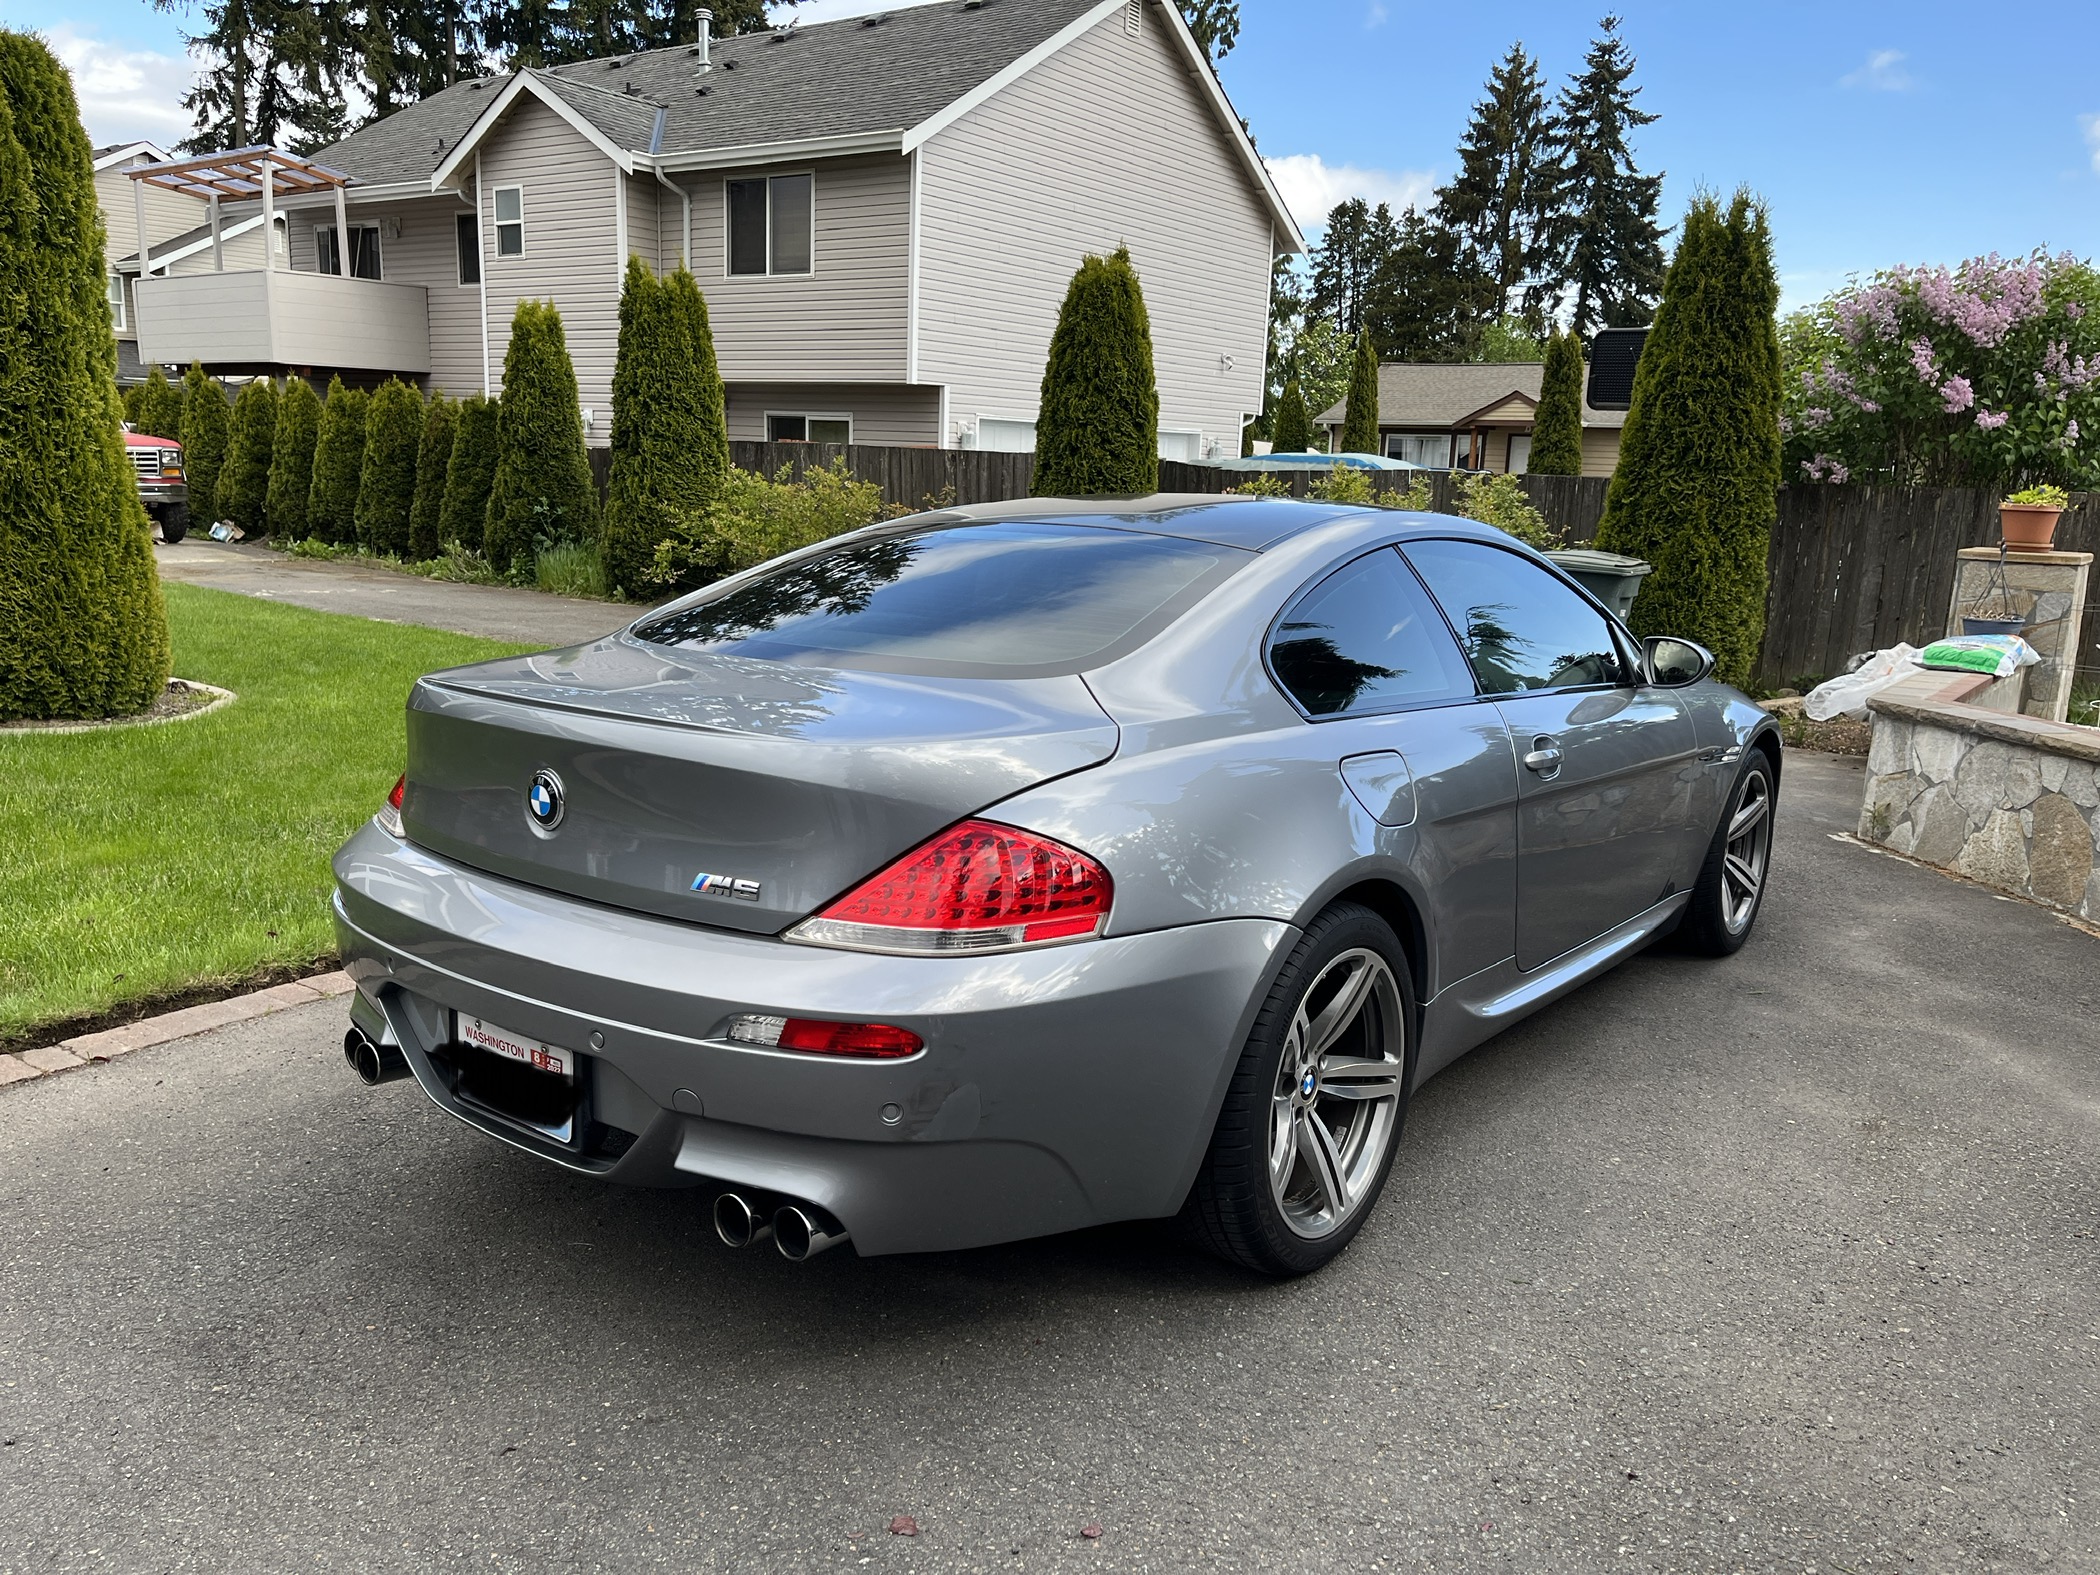 Used 2007 BMW M6 for Sale Near Me | Cars.com